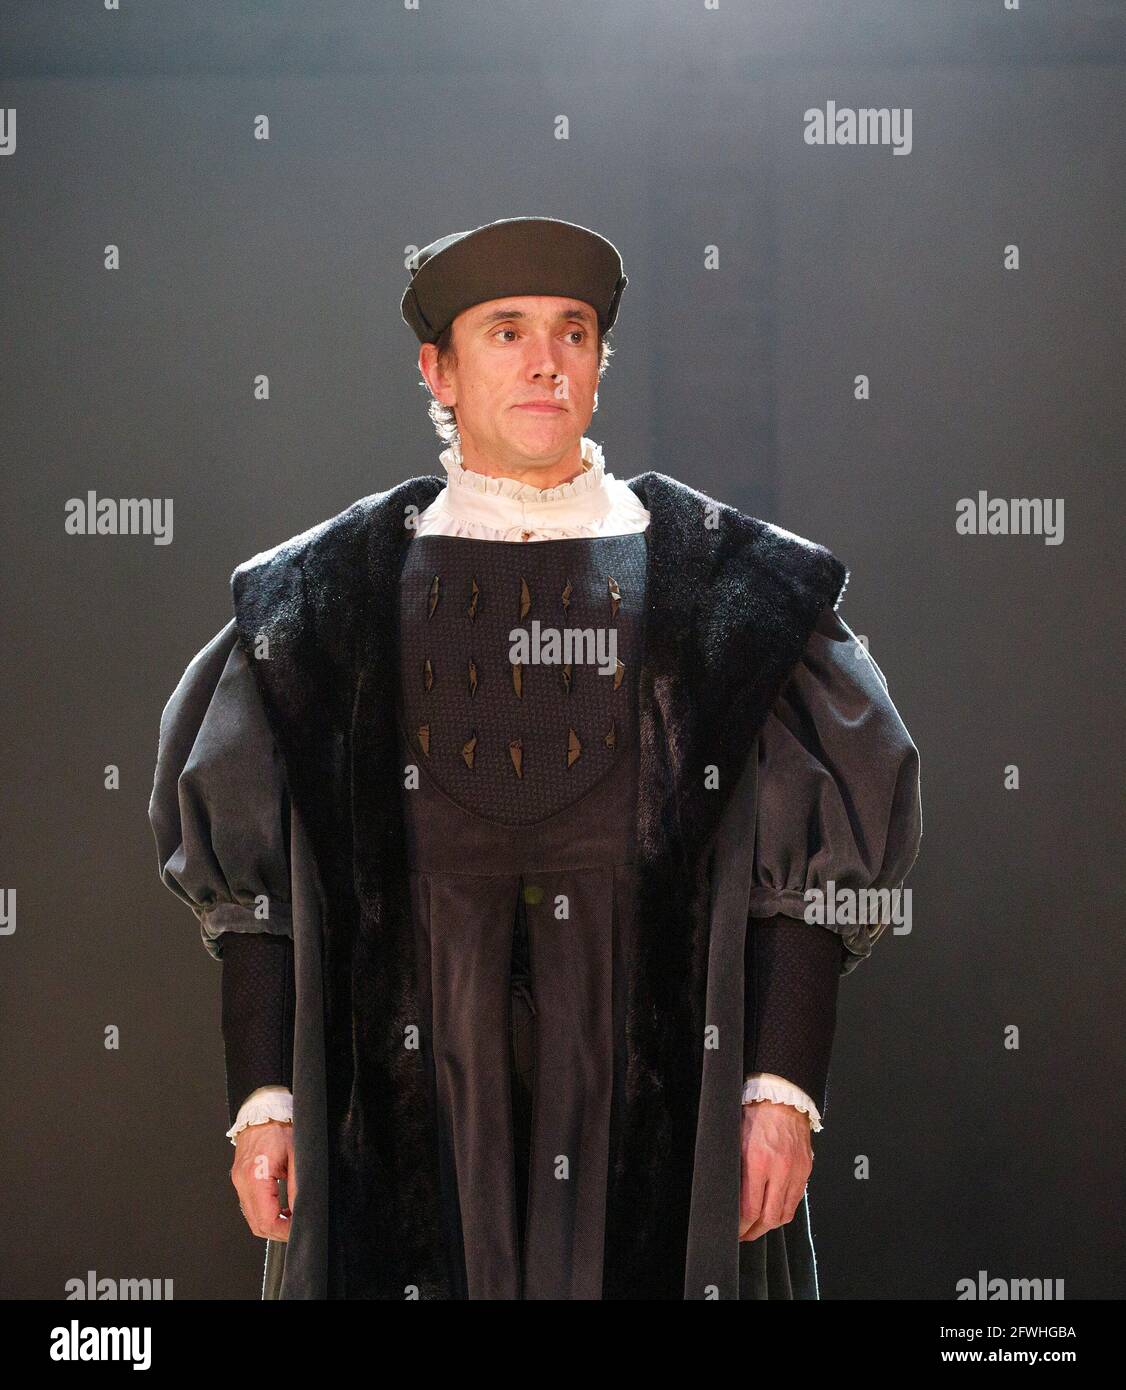 Ben Miles (Thomas Cromwell) in WOLF HALL by Hilary Mantel at the Royal Shakespeare Company (RSC), Swan Theatre, Stratford-upon-Avon, England  08/01/2014  adapted for the stage by Mike Poulton  design: Christopher Oram  lighting: Paule Constable  director: Jeremy Herrin Stock Photo